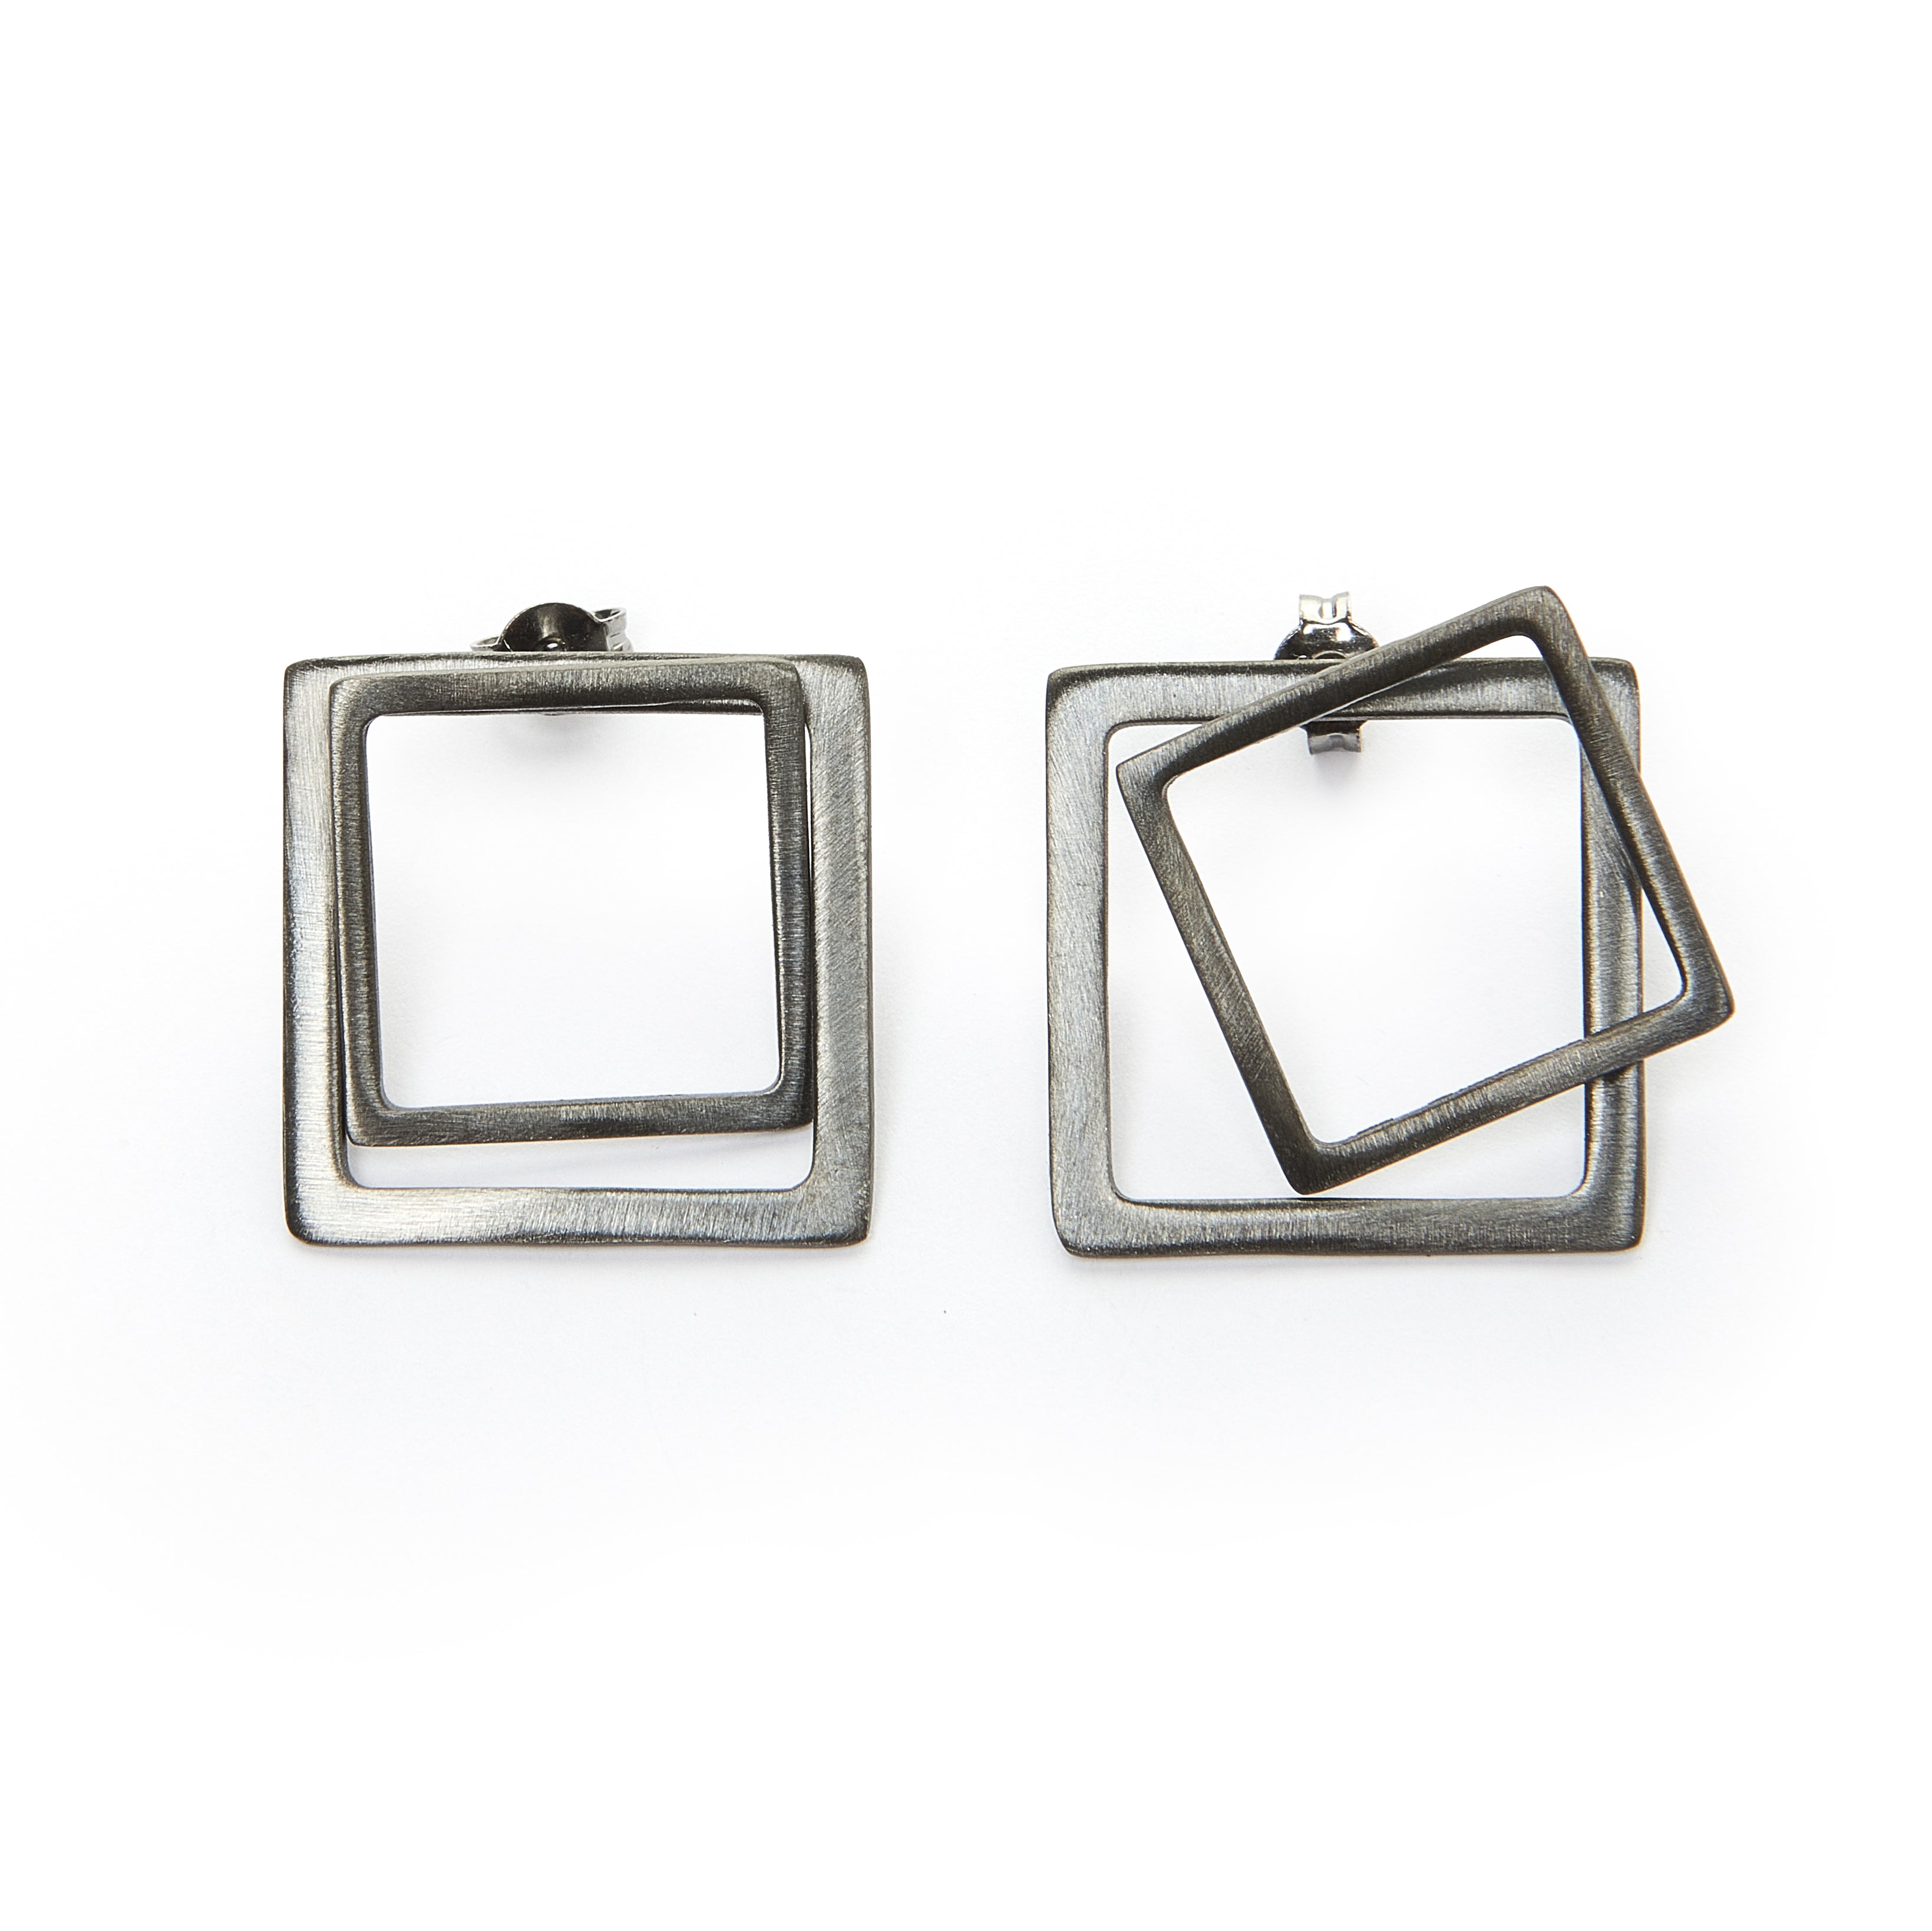 Square ear jacket earrings in silver 925 or brass, gold-plated or platinum-plated that can be worn in more than one configuration. Wear both front and back geometric earrings in the front of the ear for a classy statement, just the front stud earrings for a minimal look, or add the back earrings for a special and unique look